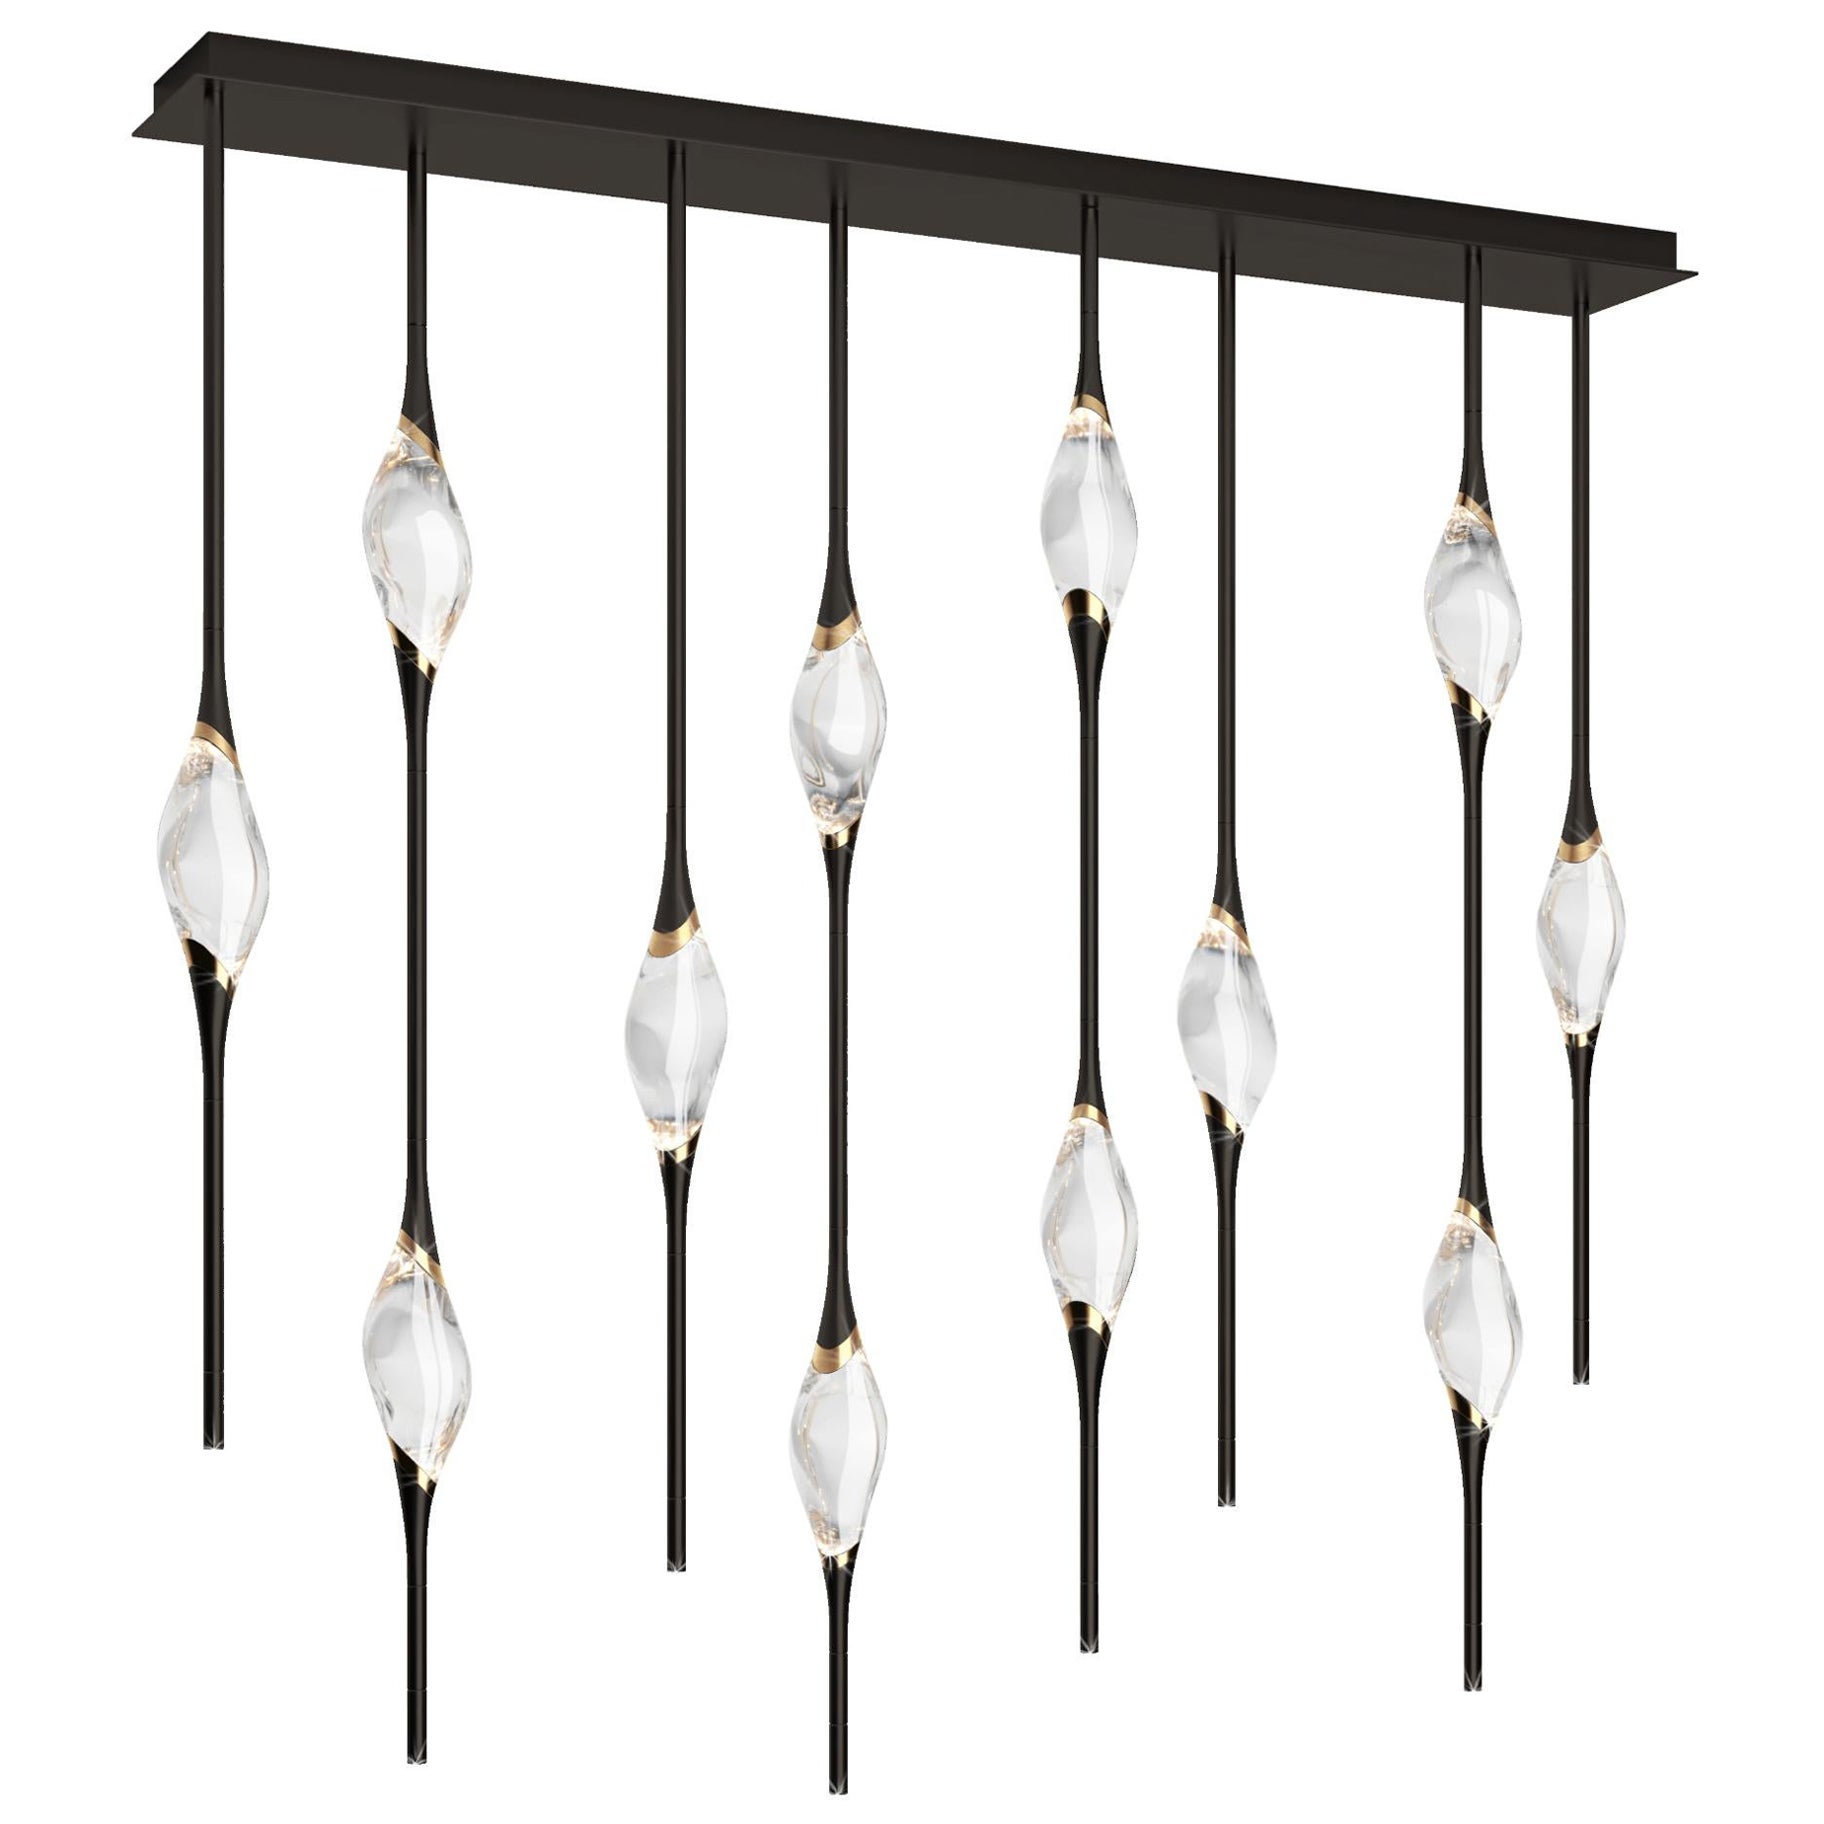 "Il Pezzo 12 Staggered Chandelier" - length 150cm/59” - black and polished brass en vente